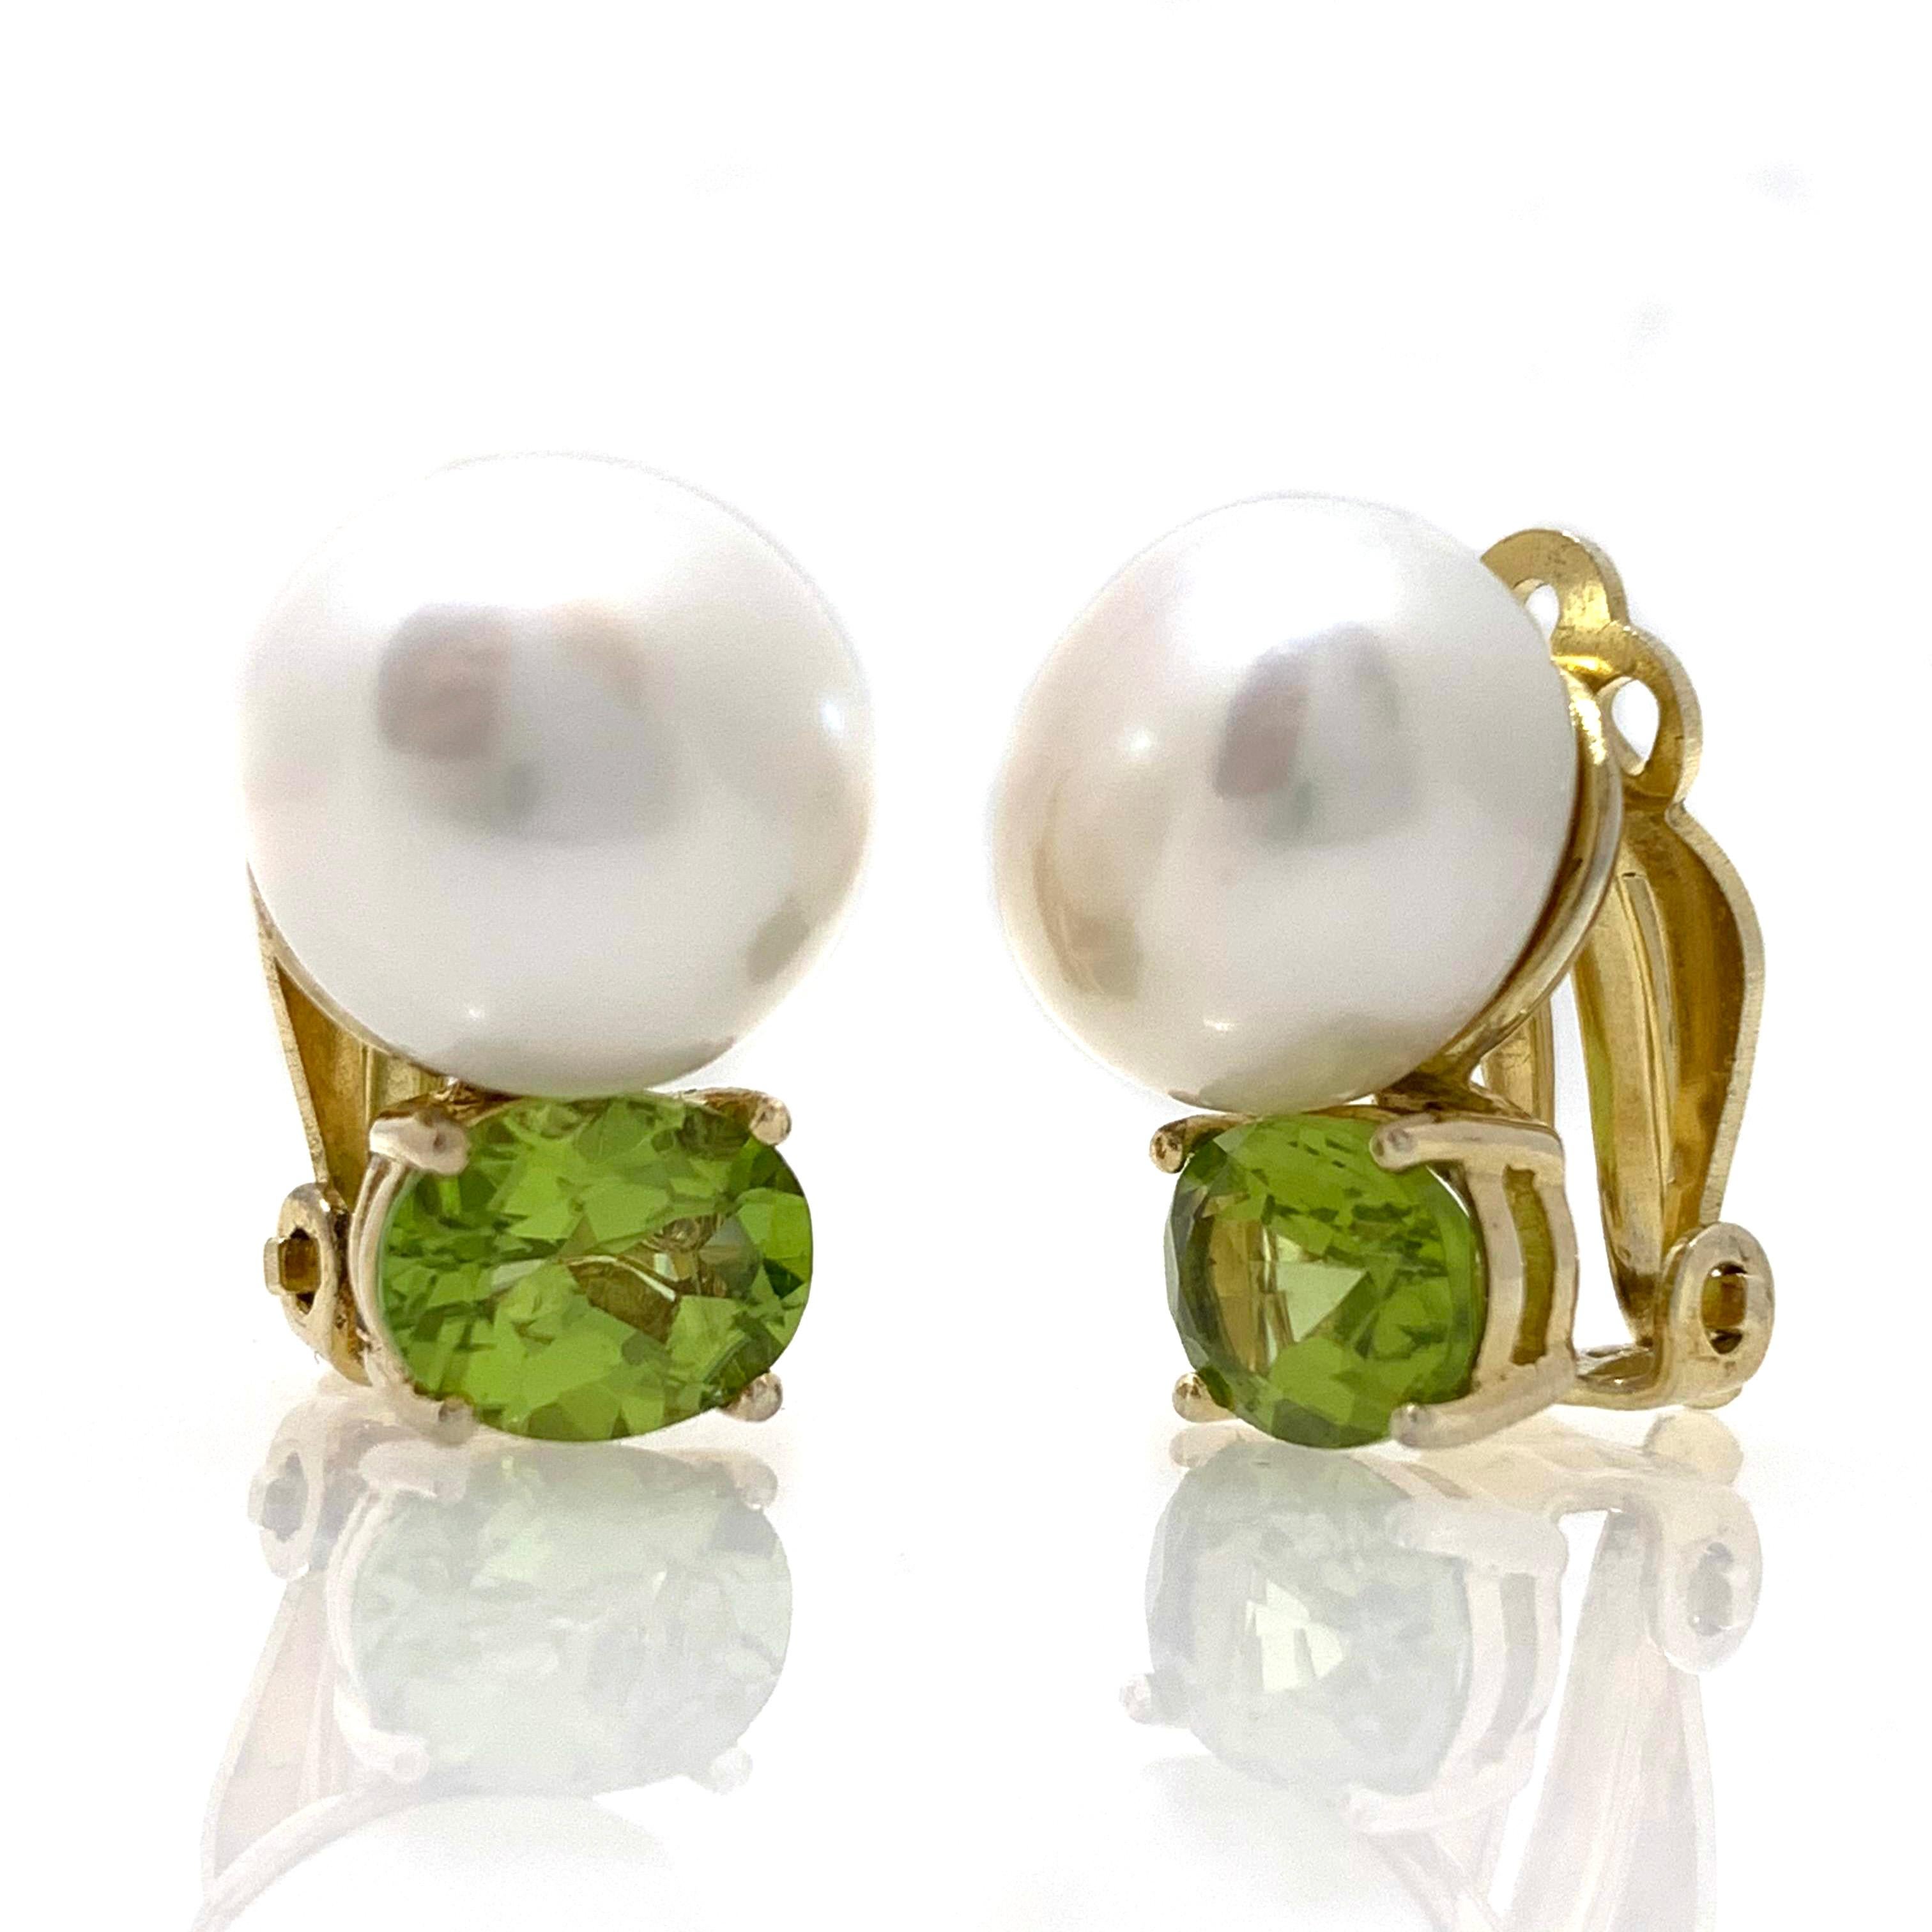 Bijoux Num Octagon Freshwater Pearl & Oval Peridot Vermeil Clip Earrings. 

The earrings feature 2 lustrous 12mm cultured freshwater pearl and 2 beautiful oval peridot, handset in 18k yellow gold vermeil over sterling silver. Comfortable clip back